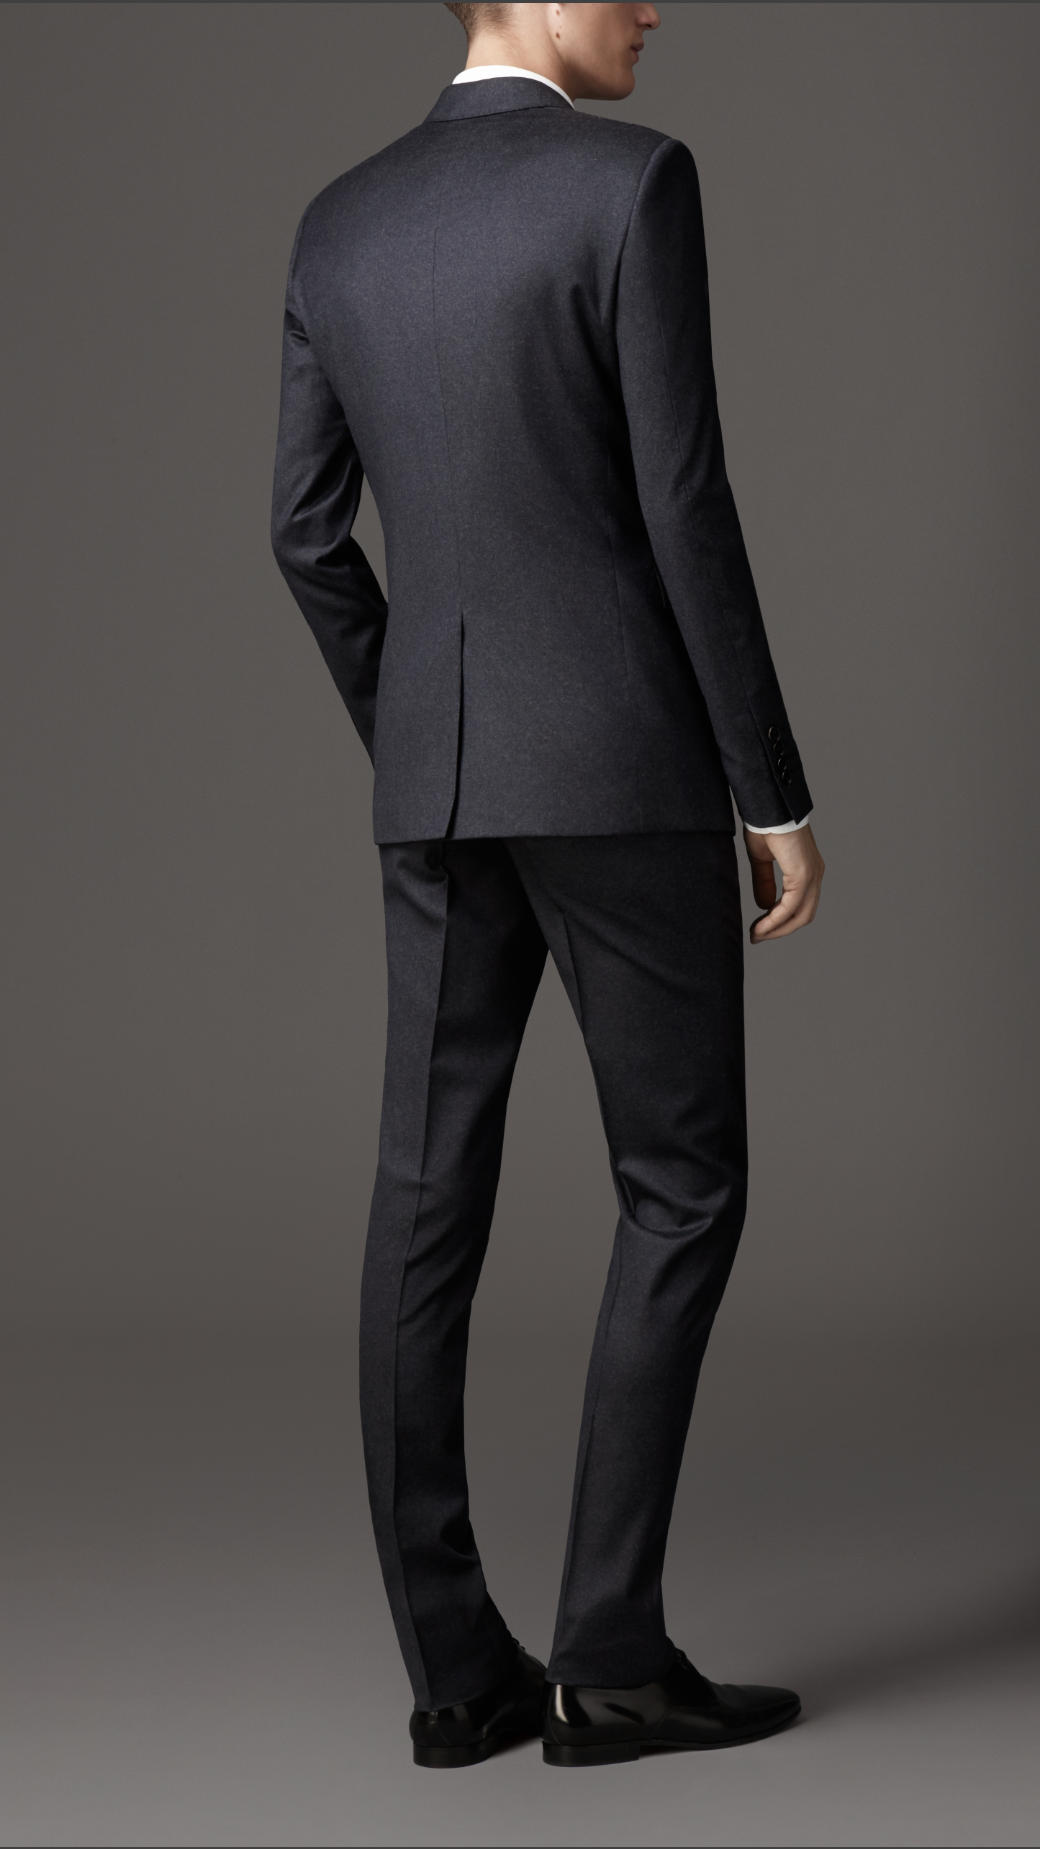 Burberry Slim Fit Wool Cashmere Suit in Blue for Men - Lyst